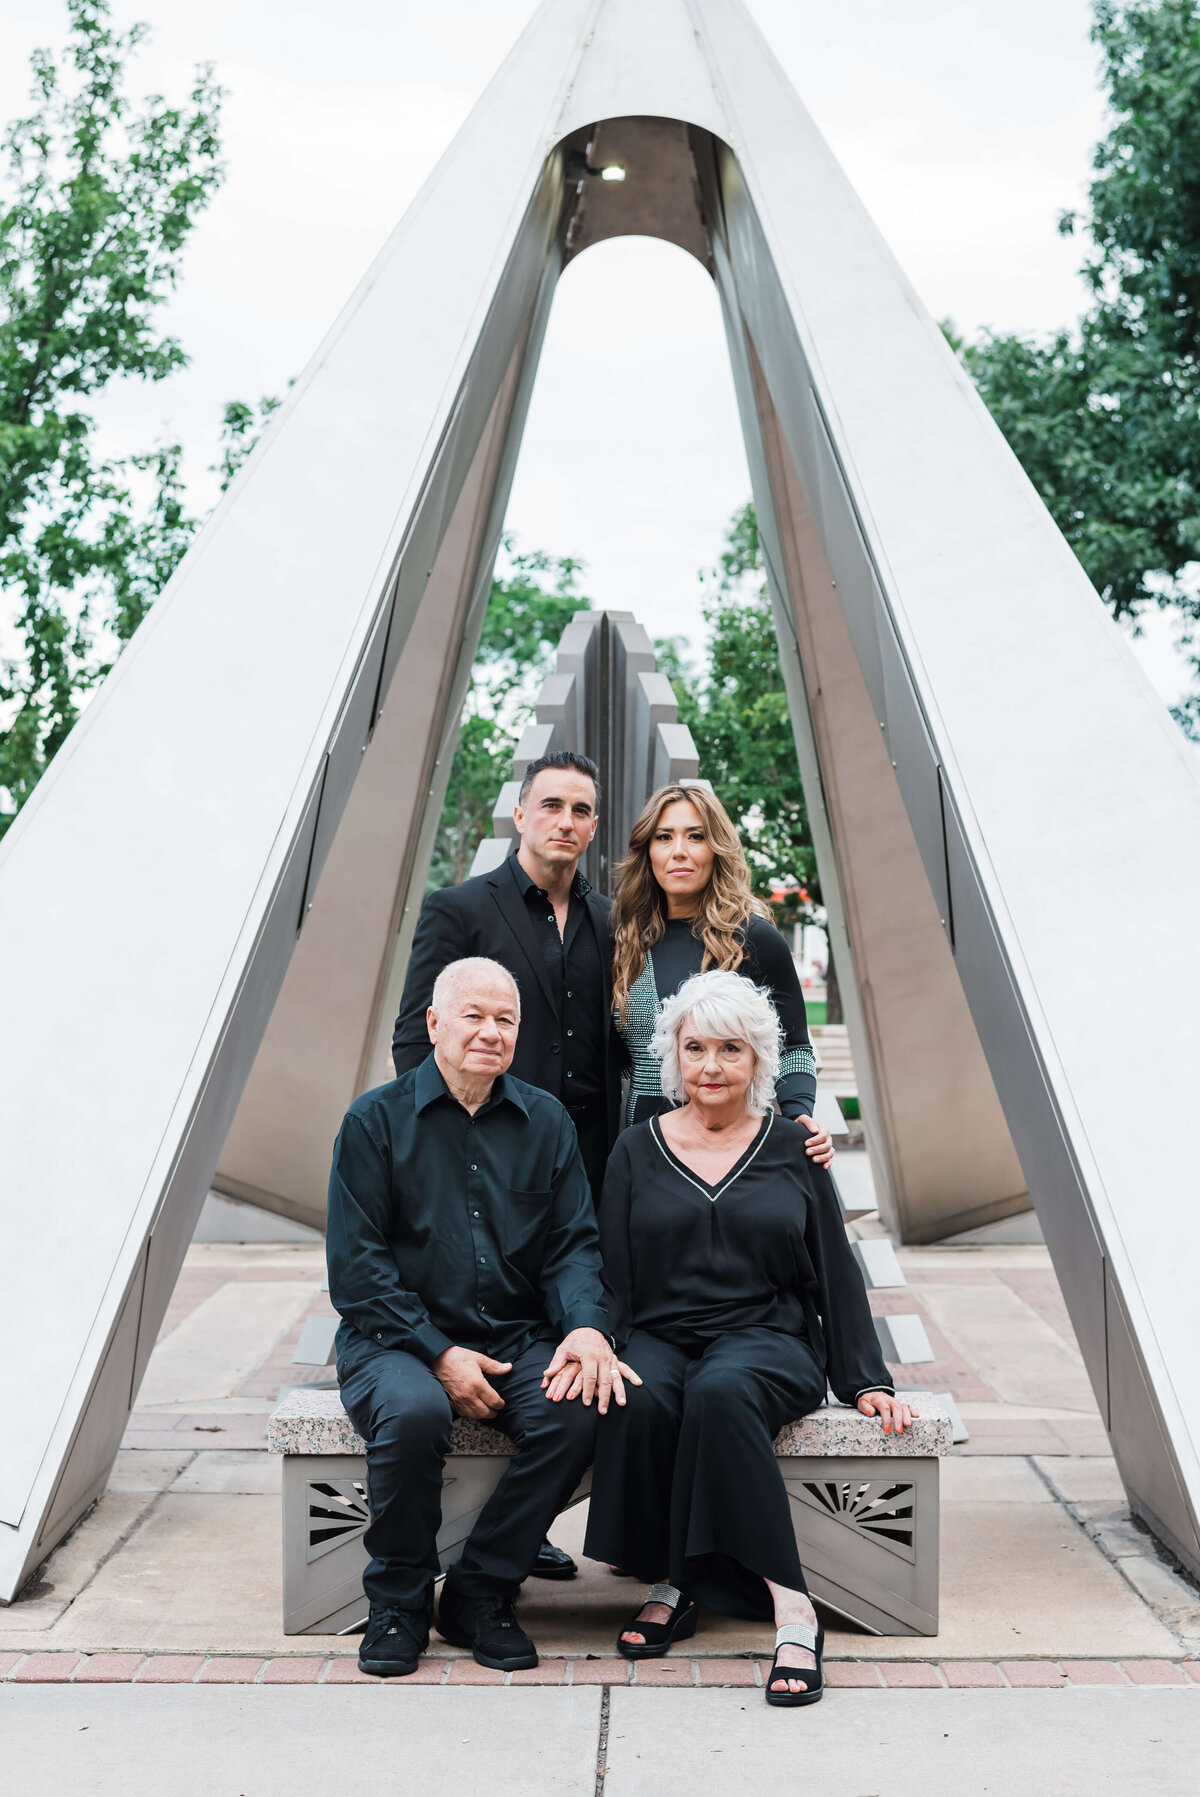 A set of grandparents and their daughter and son-in-law stand in front of an art sculpture and look into the camera